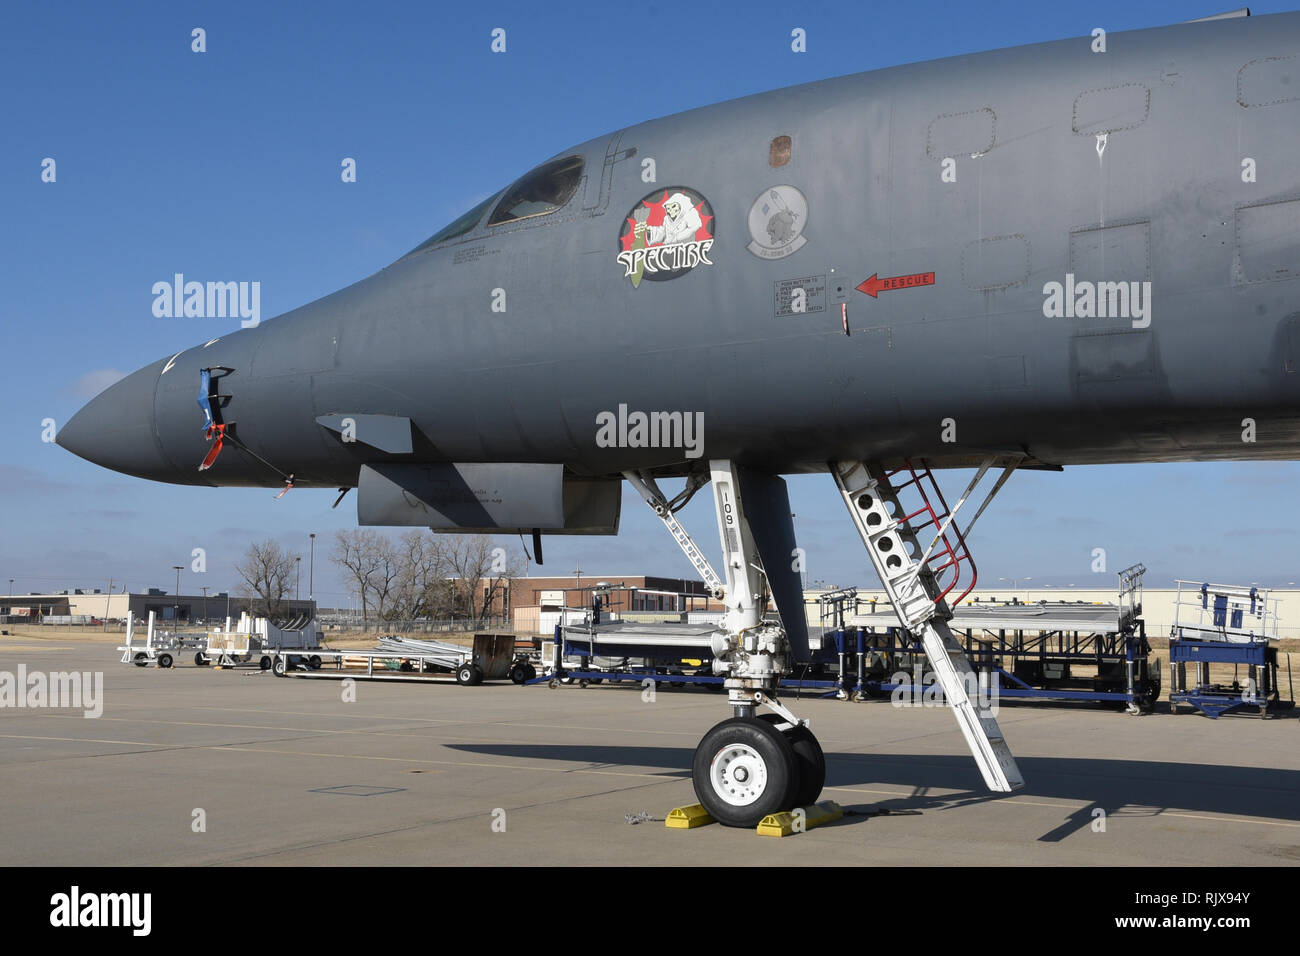 Boeing B-1B Lancer, serial # 86-0109, wearing 'Spectre' nose-art shown at the Maintenance, Repair and Overhaul Training Center Jan. 17, 2019, Tinker Air Force Base, Oklahoma. MROTC is a facility used for heavy aircraft maintenance in a public/private partnership between the Air Force and Boeing. (U.S. Air Force photo/Greg L. Davis) Stock Photo